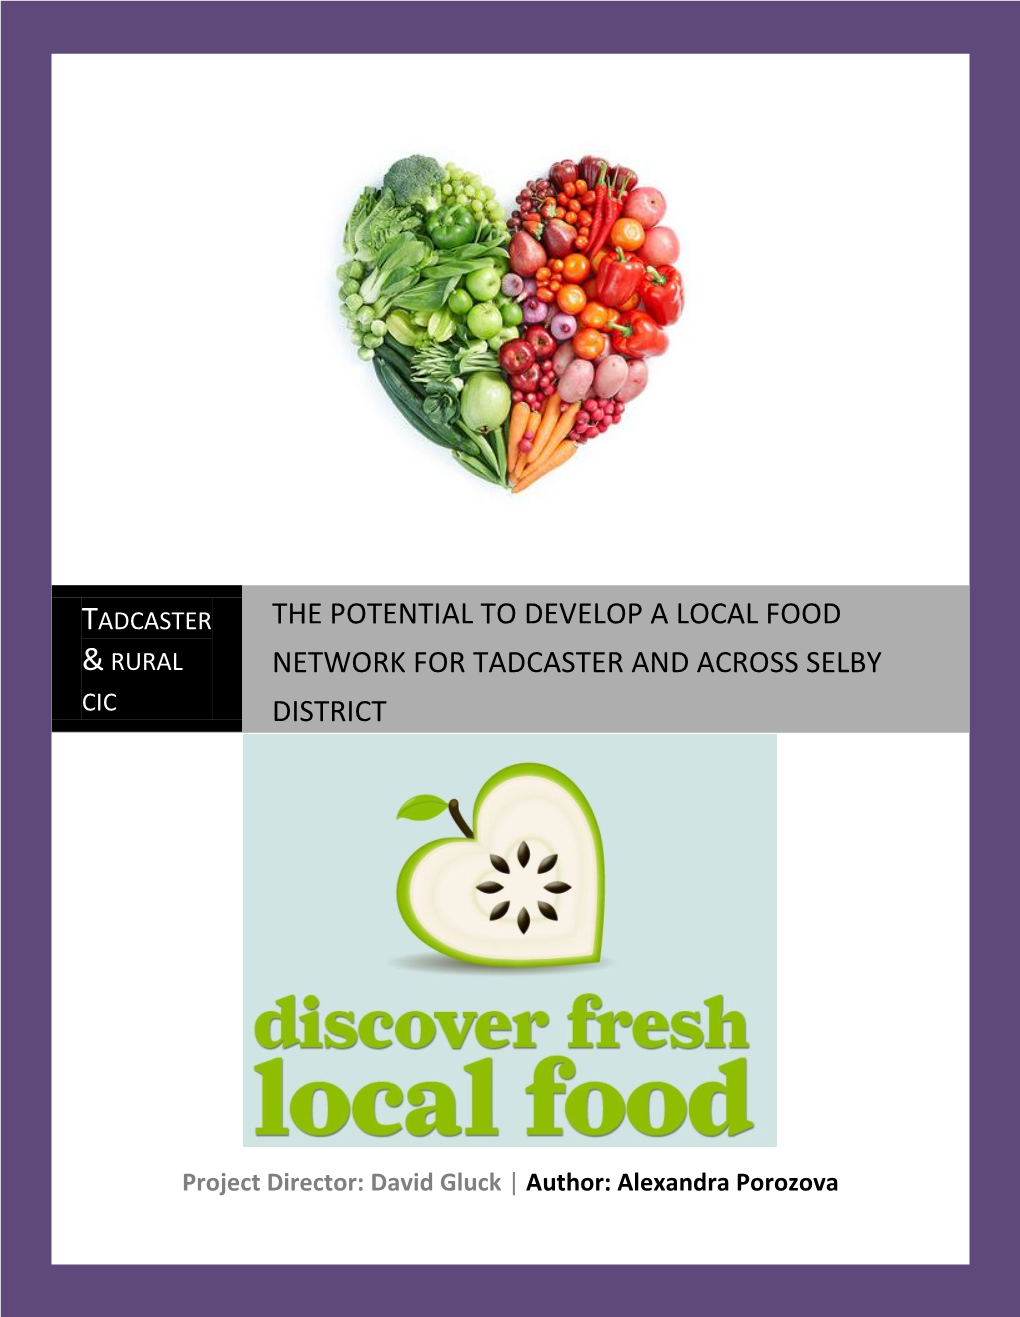 The Potential to Develop a Local Food Network for Tadcaster and Across